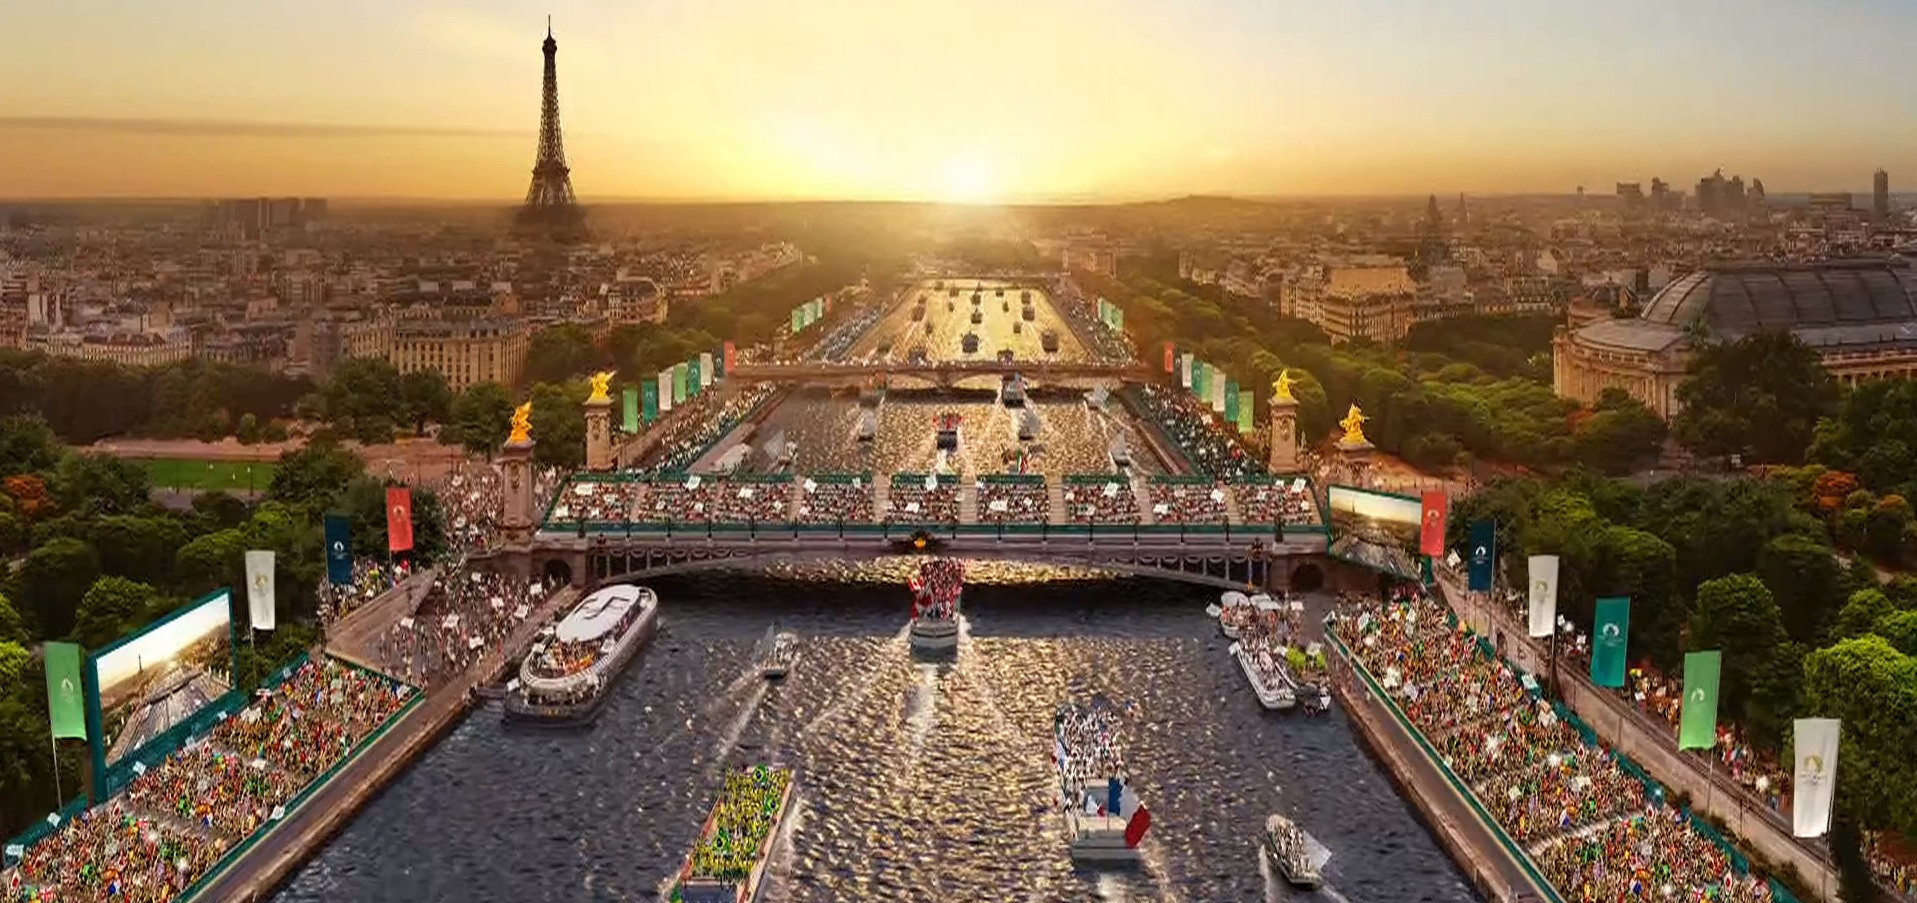 At least 600,000 spectators are expected to watch the Opening Ceremony of the Paris 2024 Olympics ©Paris 2024